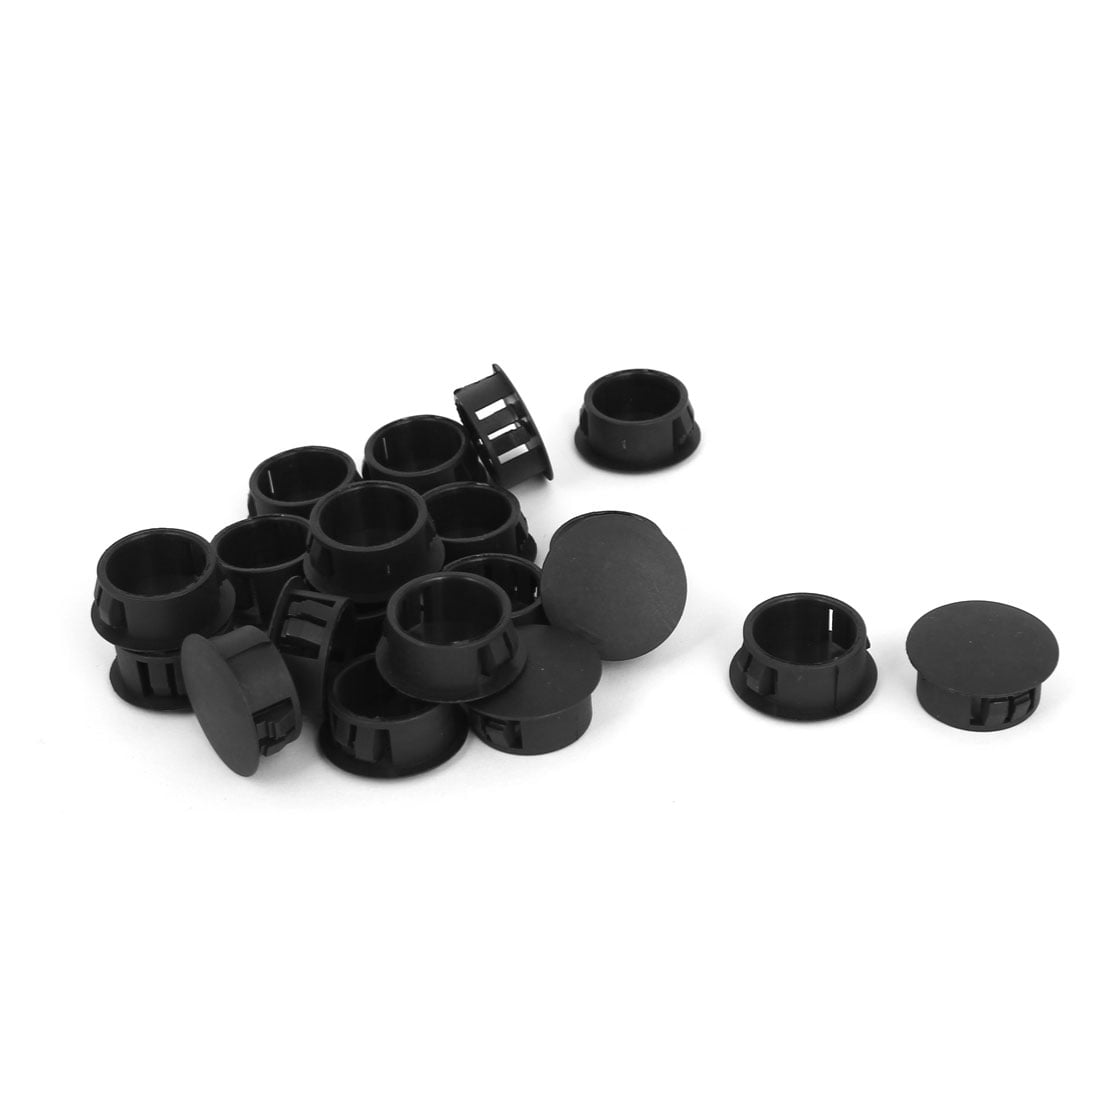 Black Plastic Round Snap In Mounting 3 4 Panel Hole Cover 20pcs